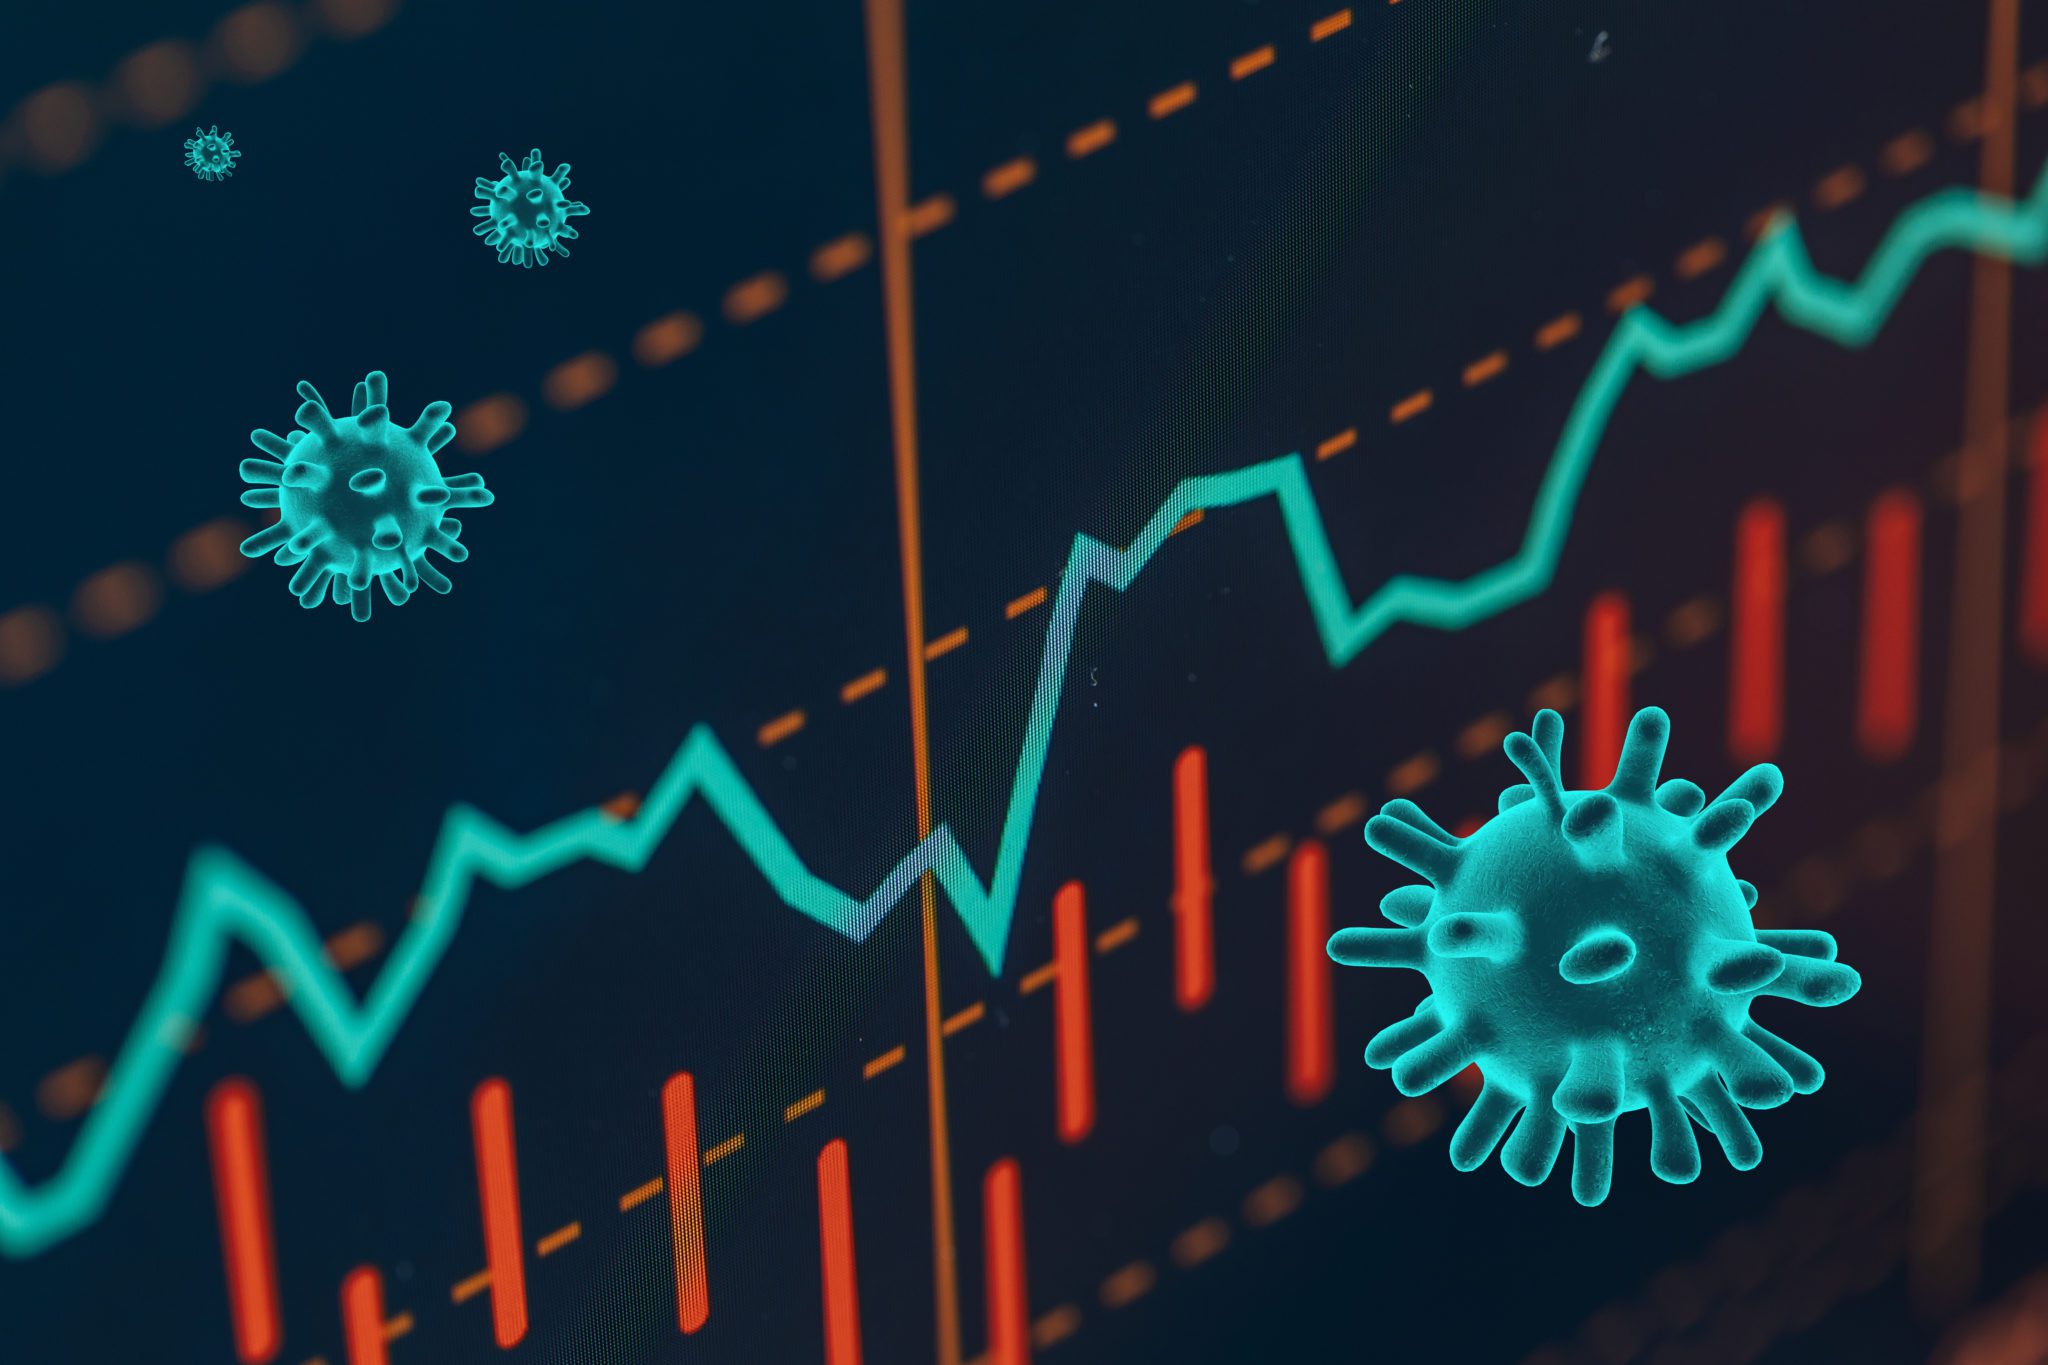 Addressing FAQs about stock market volatility and the coronavirus